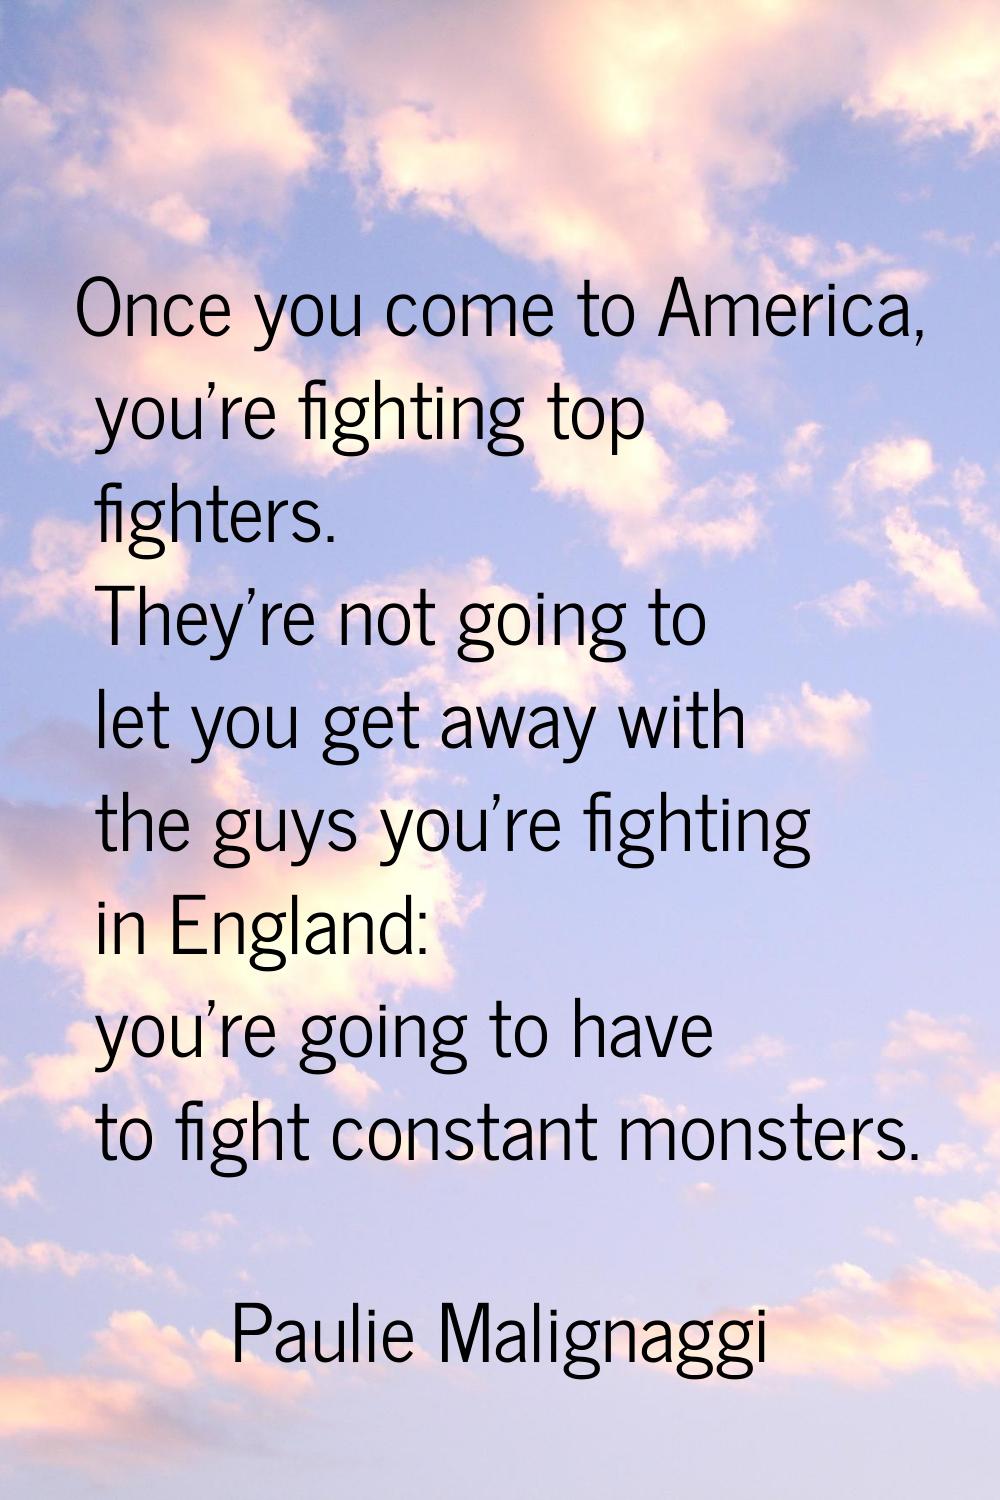 Once you come to America, you're fighting top fighters. They're not going to let you get away with 